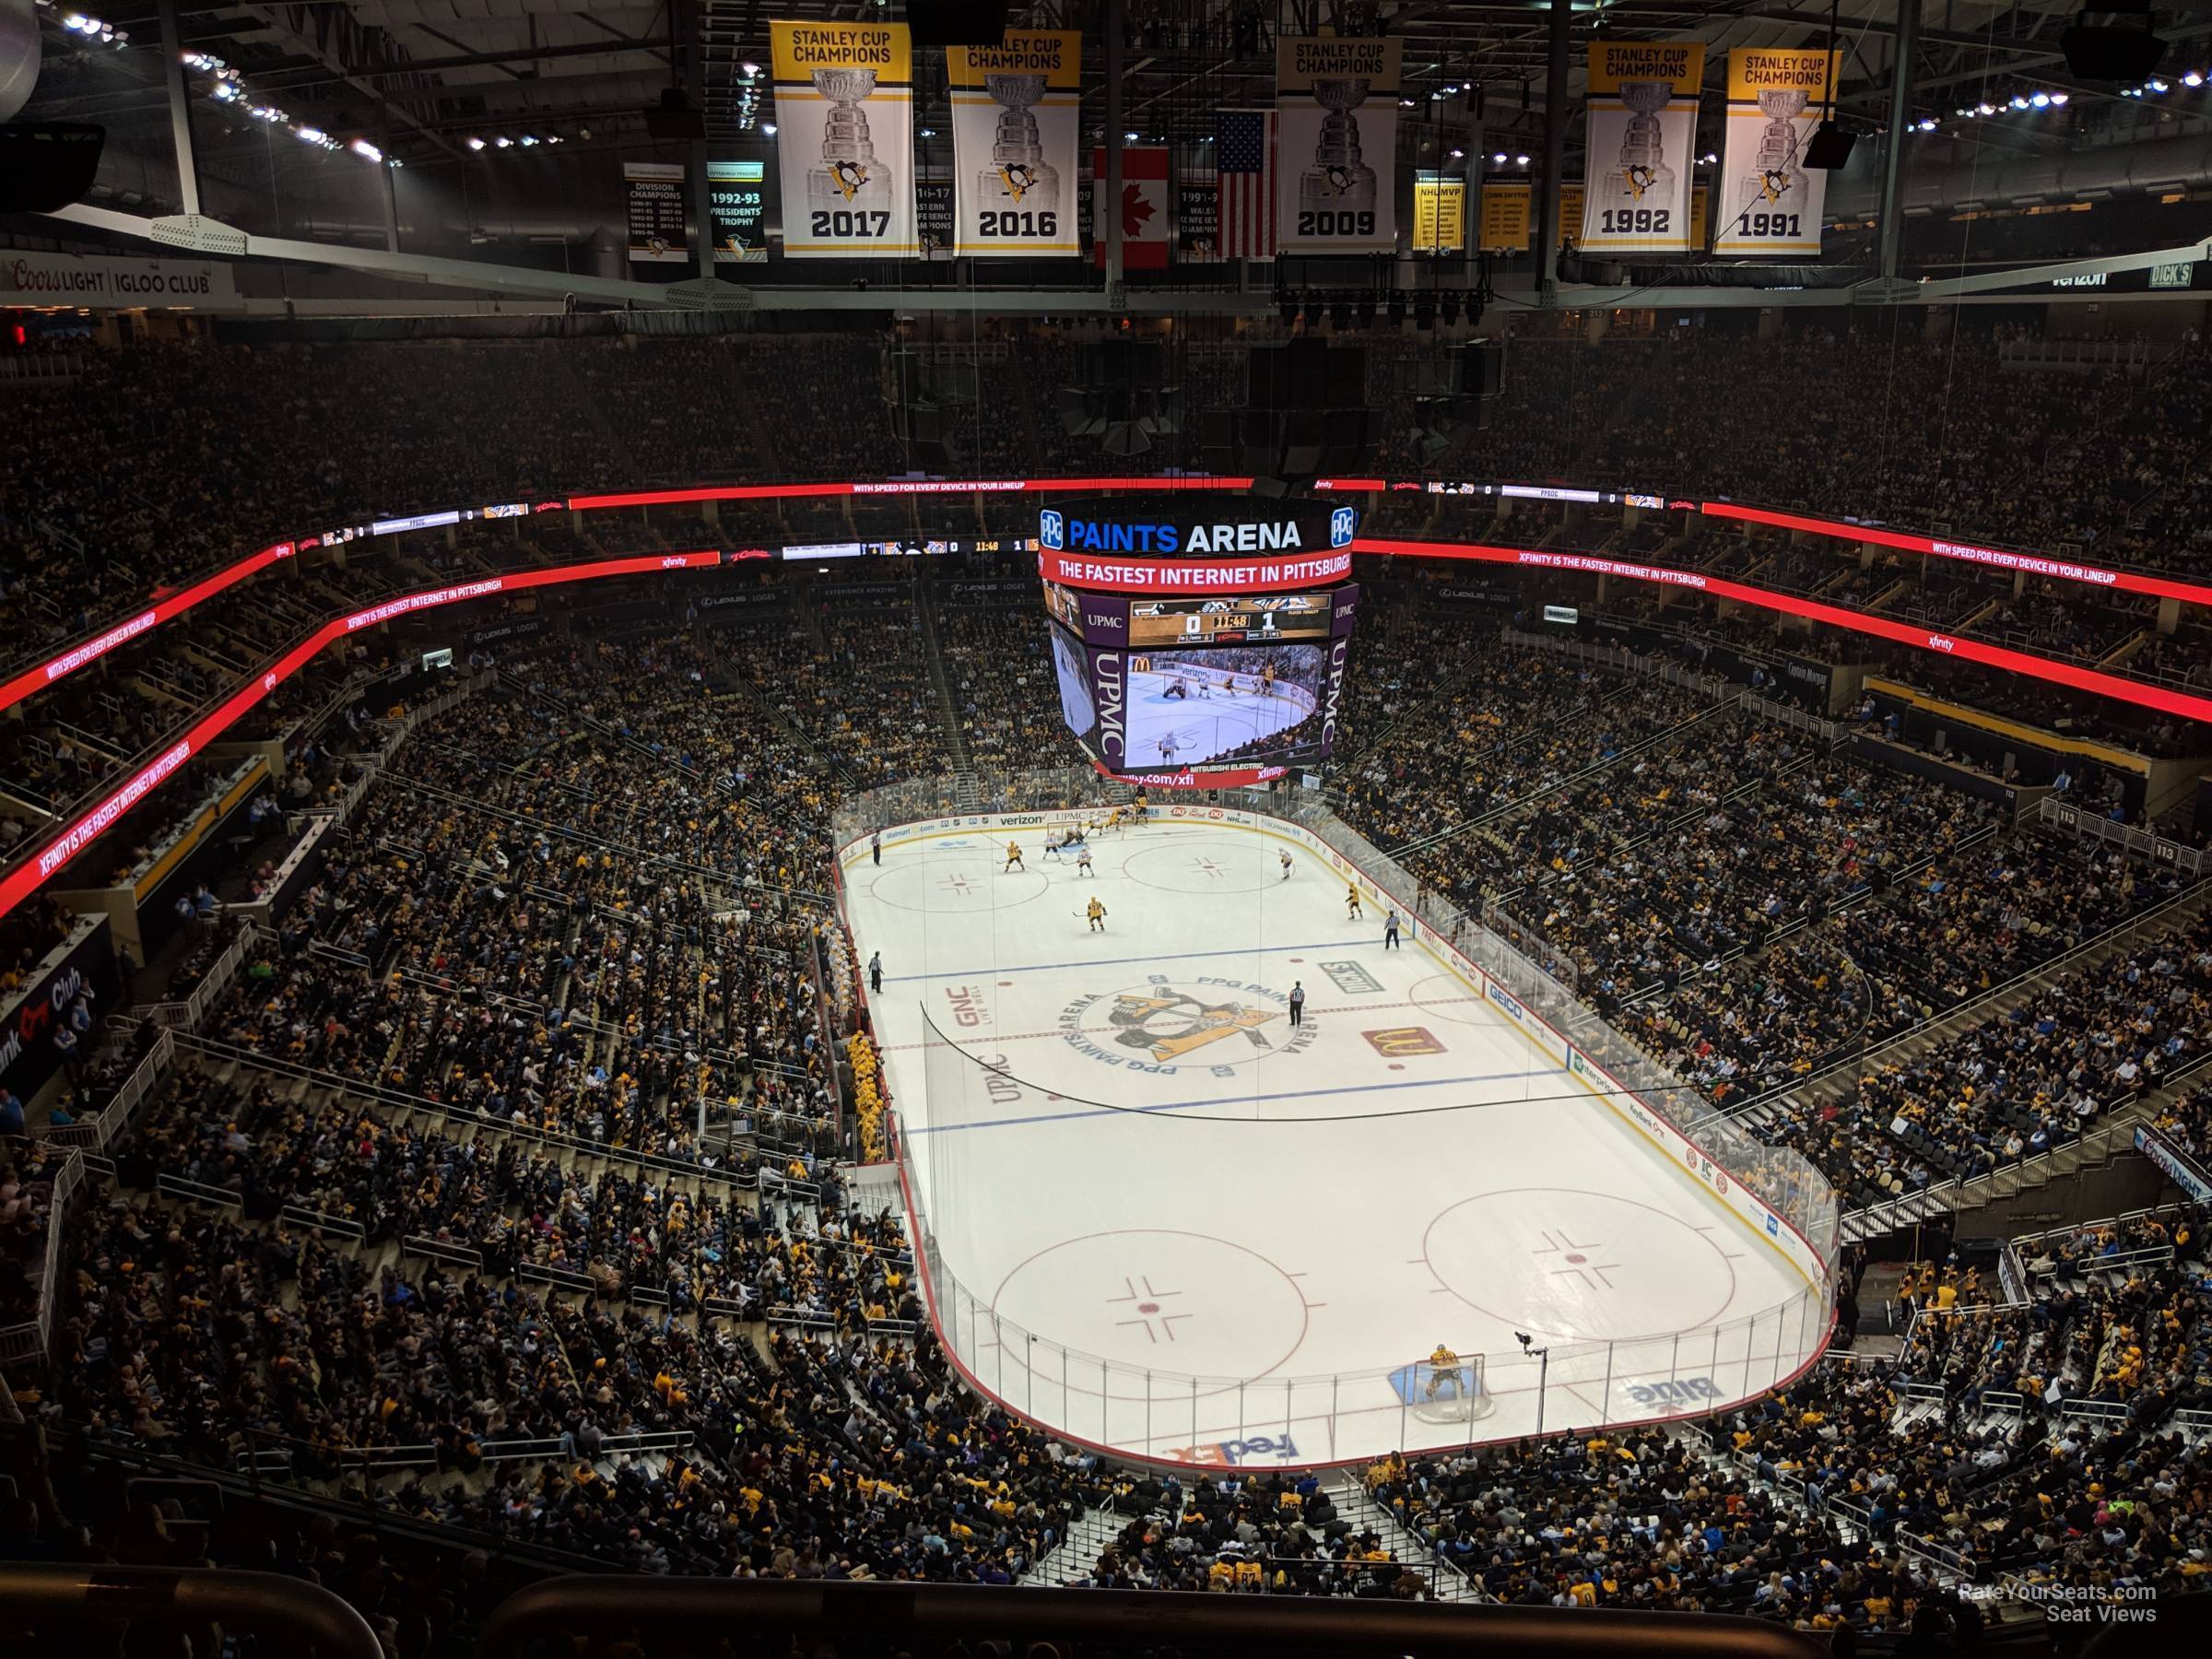 section 230, row sro seat view  for hockey - ppg paints arena